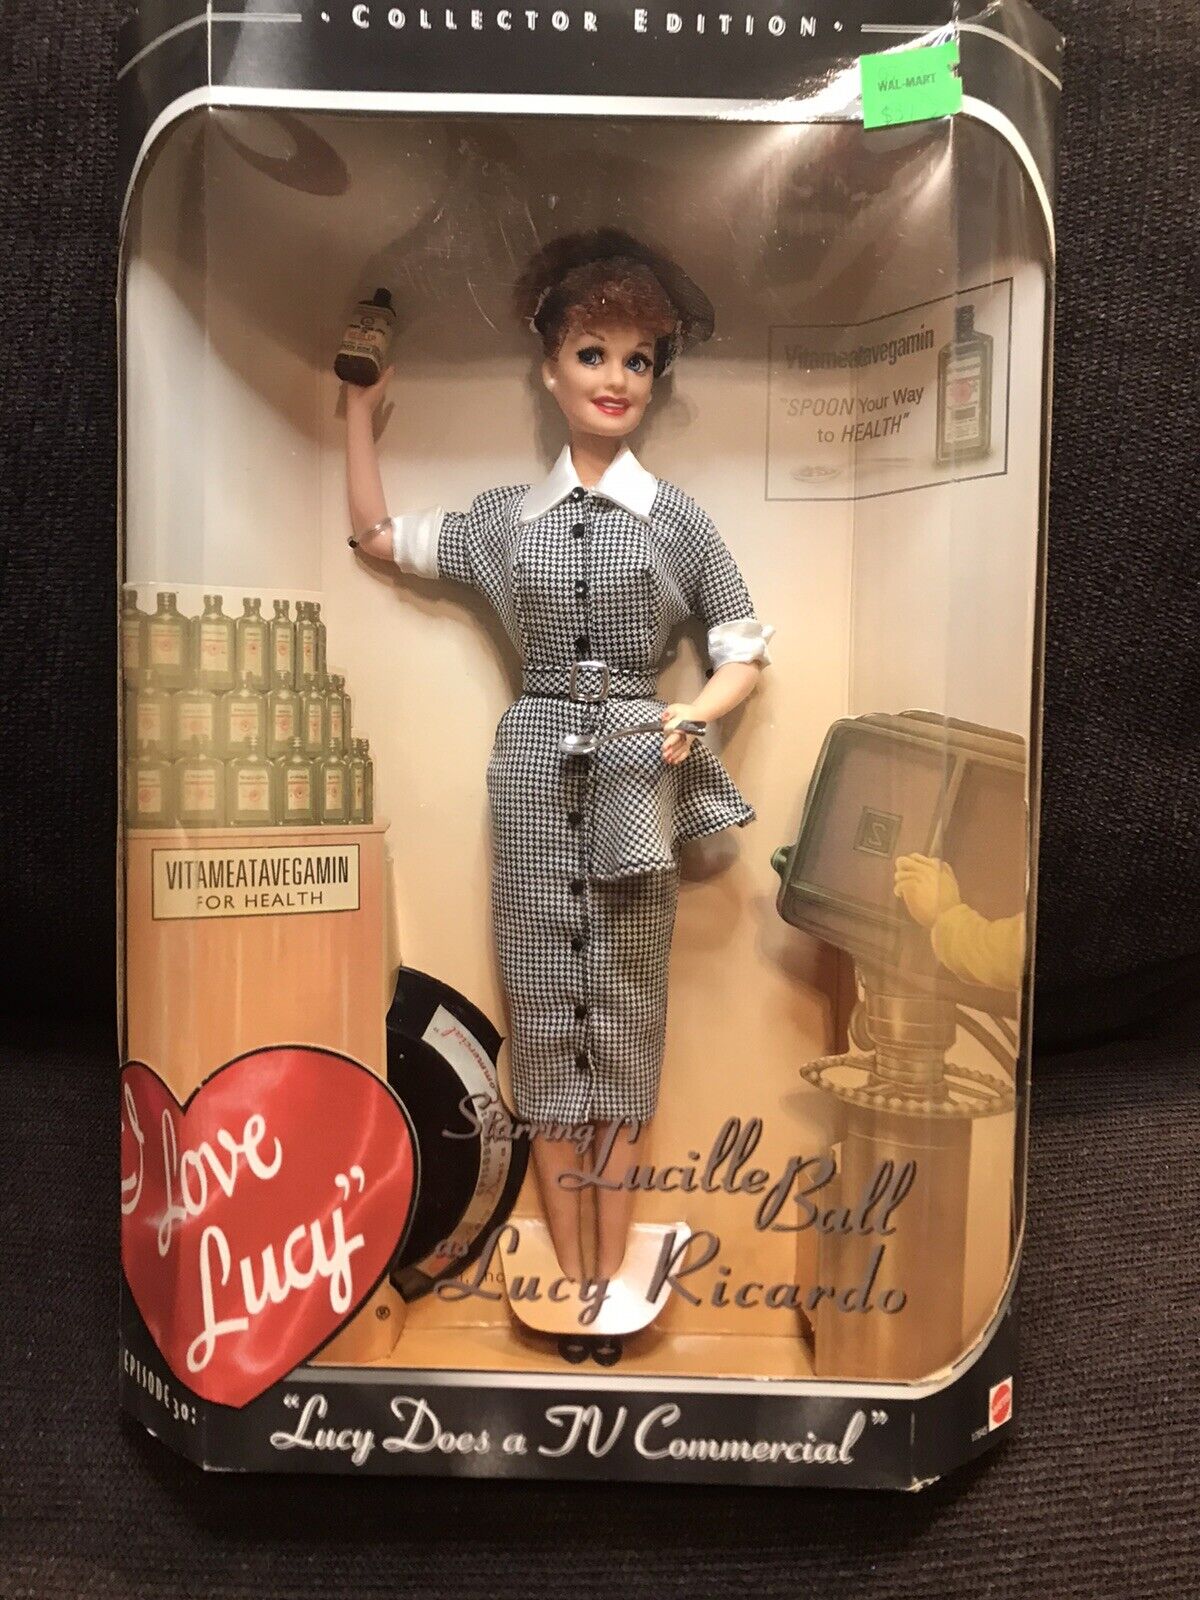 NEW 1997 Mattel I Love Lucy Collector Edition Barbie Doll #17645.